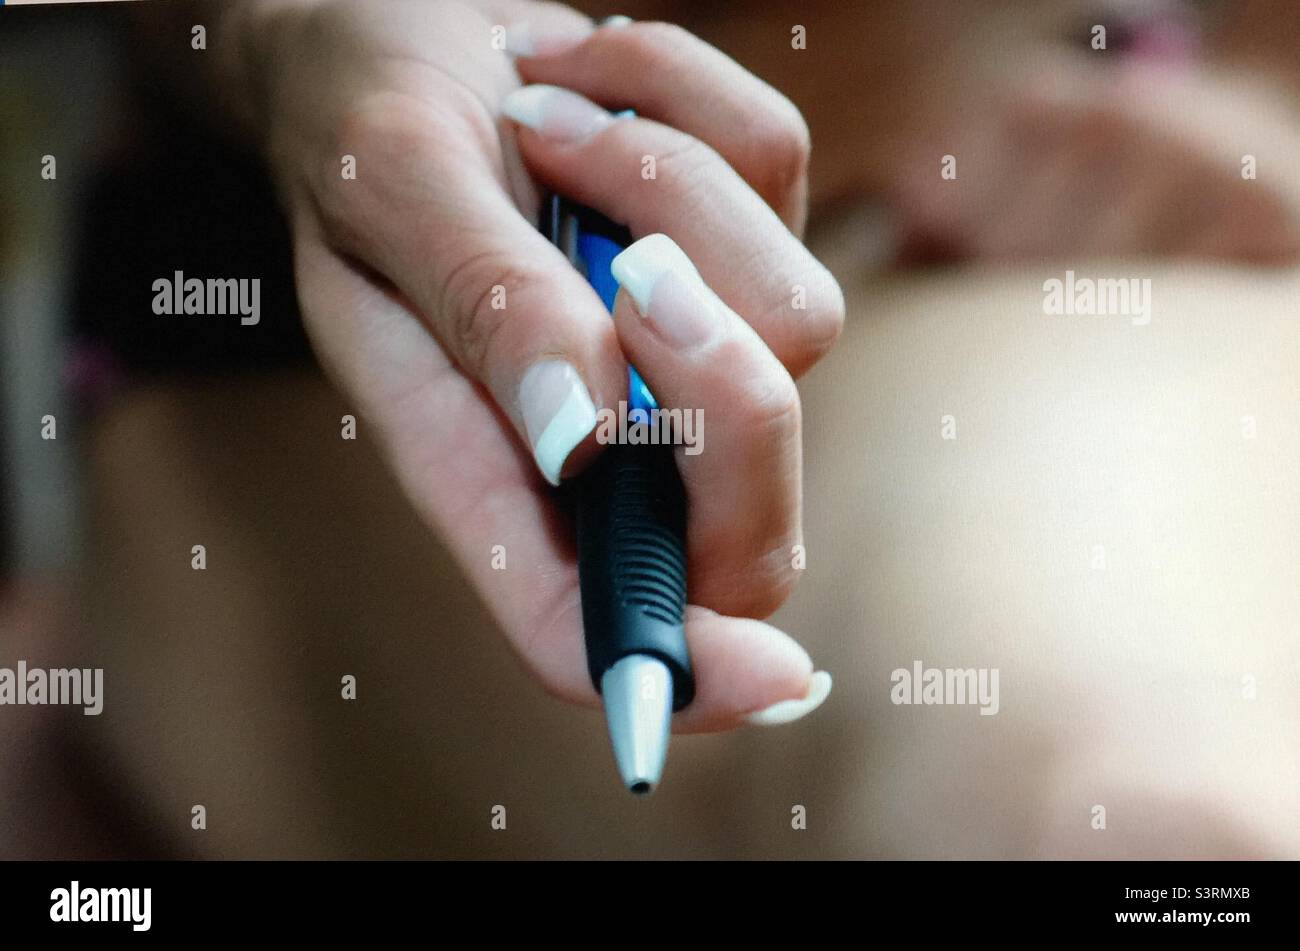 Pen in hand, woman’s hand, pen, ball point pen, manicured hand, Stock Photo